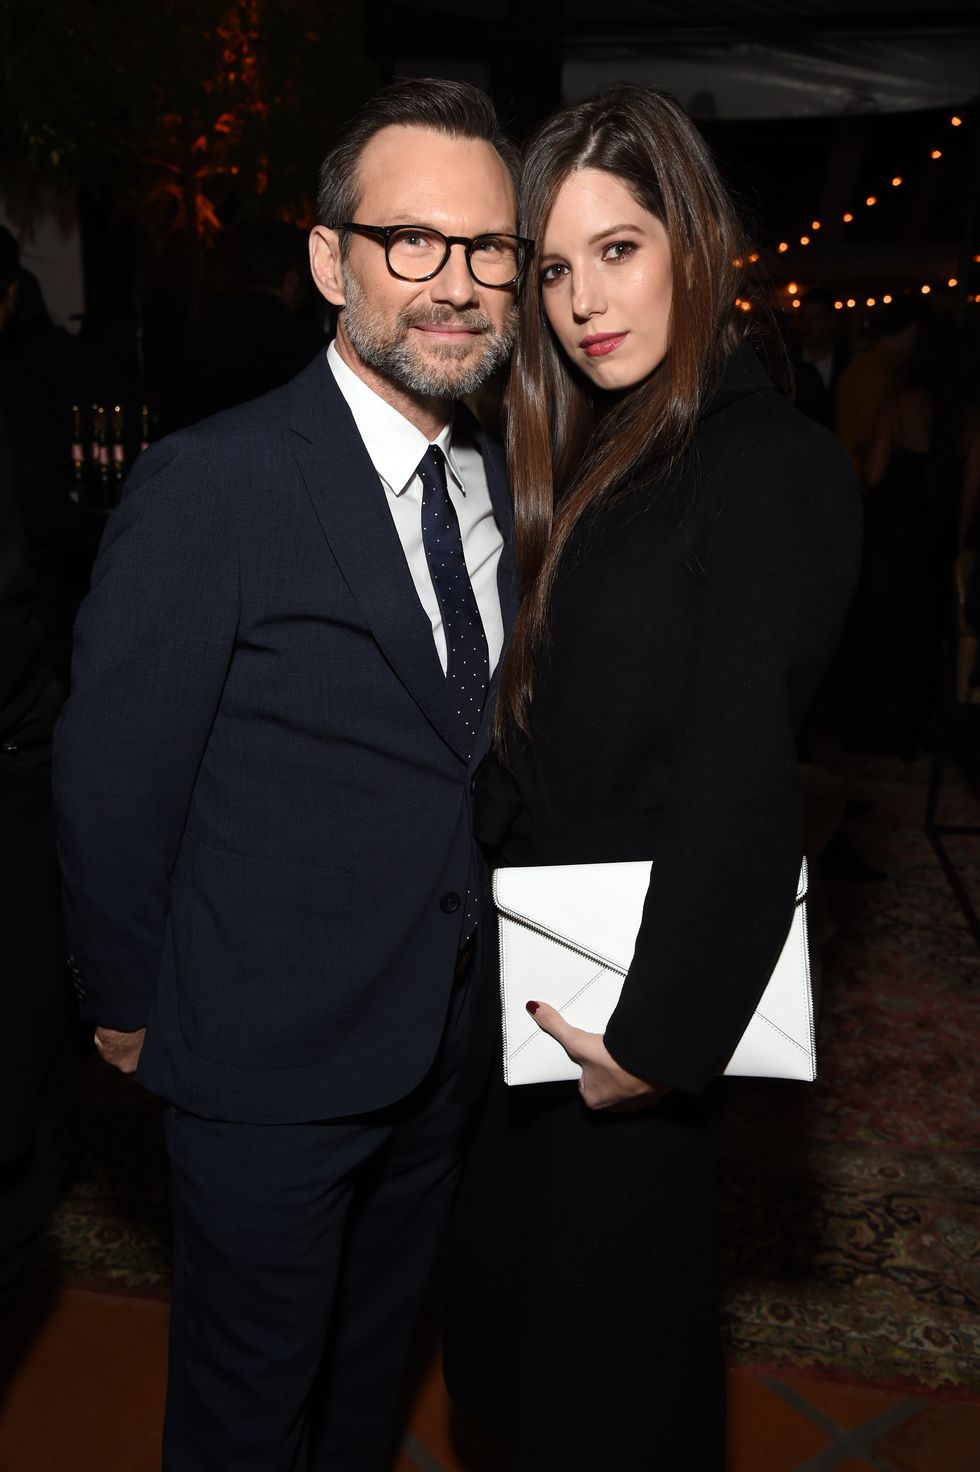 beverly hills, ca   december 06  christian slater and brittany lopez attend the 2018 gq men of the year party at a private residence on december 6, 2018 in beverly hills, california  photo by michael kovacgetty images for gq